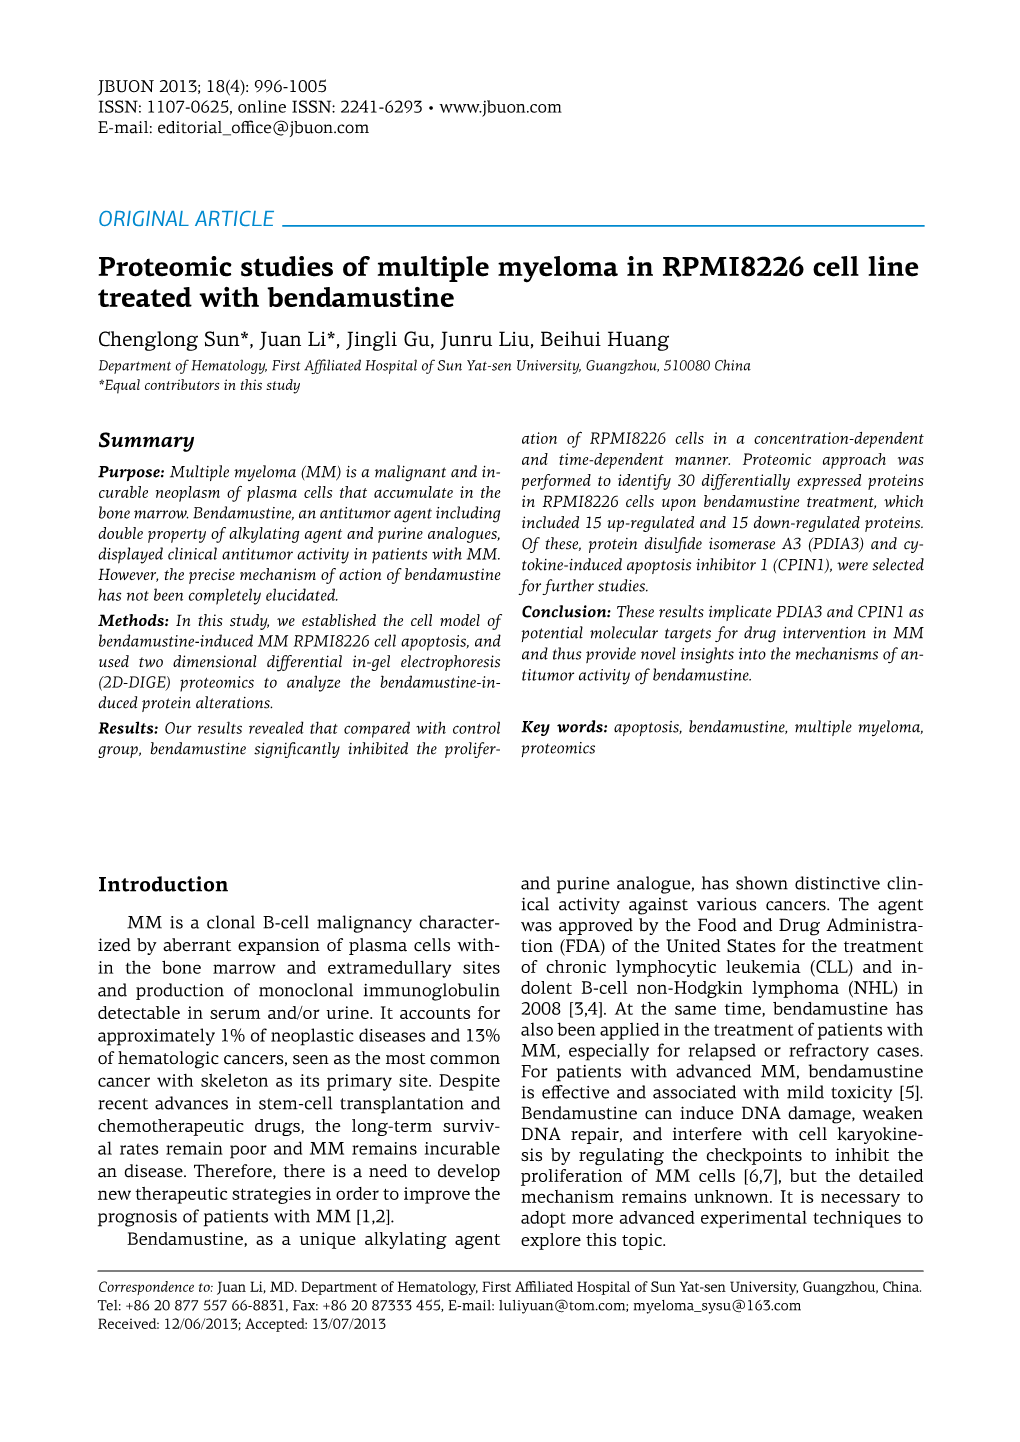 Proteomic Studies of Multiple Myeloma in RPMI8226 Cell Line Treated with Bendamustine